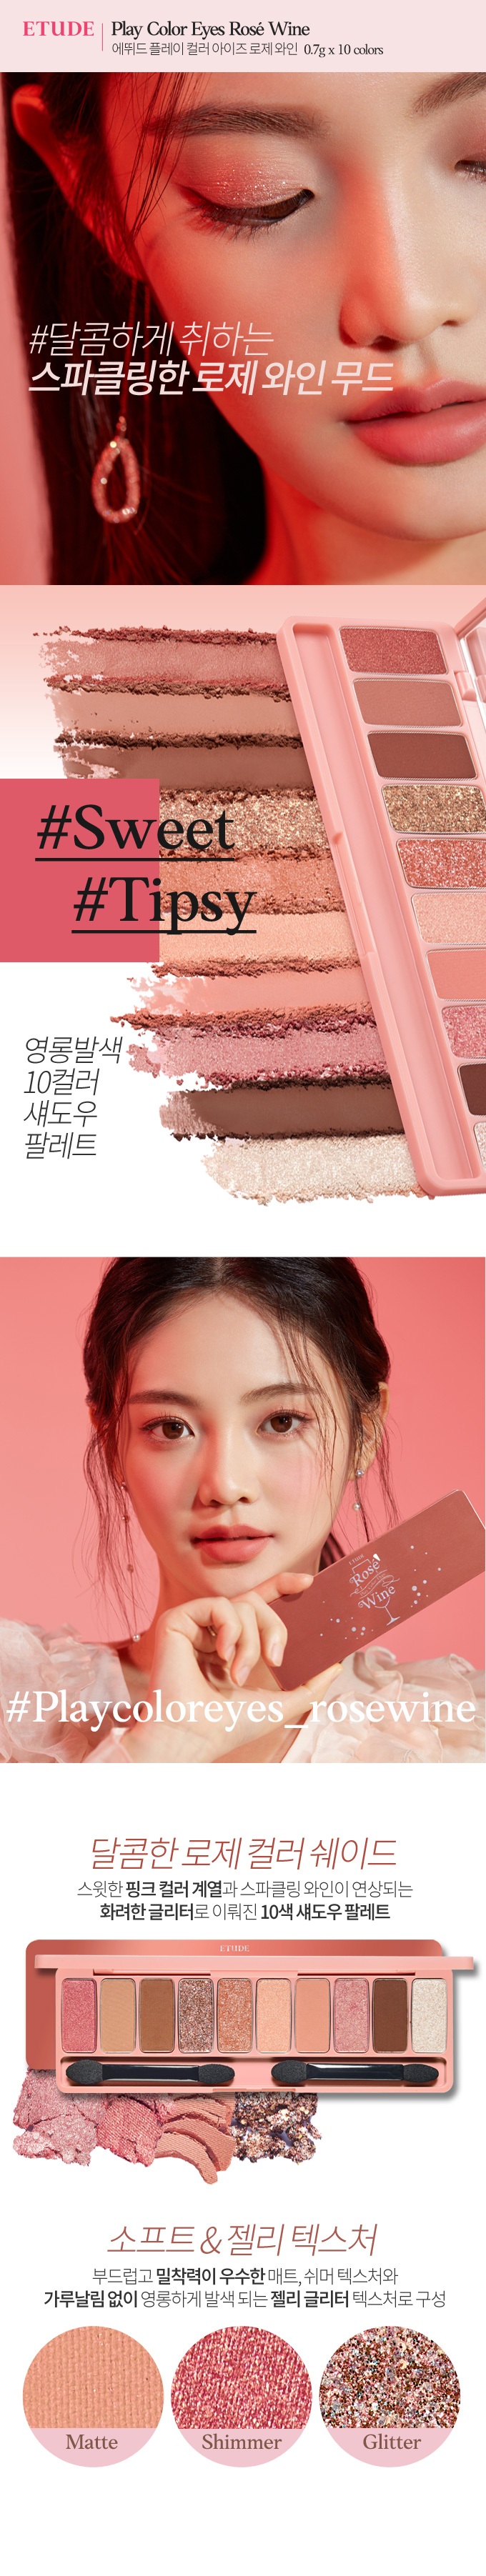 Etude House Play Color Eyes Rose Wine Eye Palette korean cosmetic makeup product online shop malaysia macau thailand1